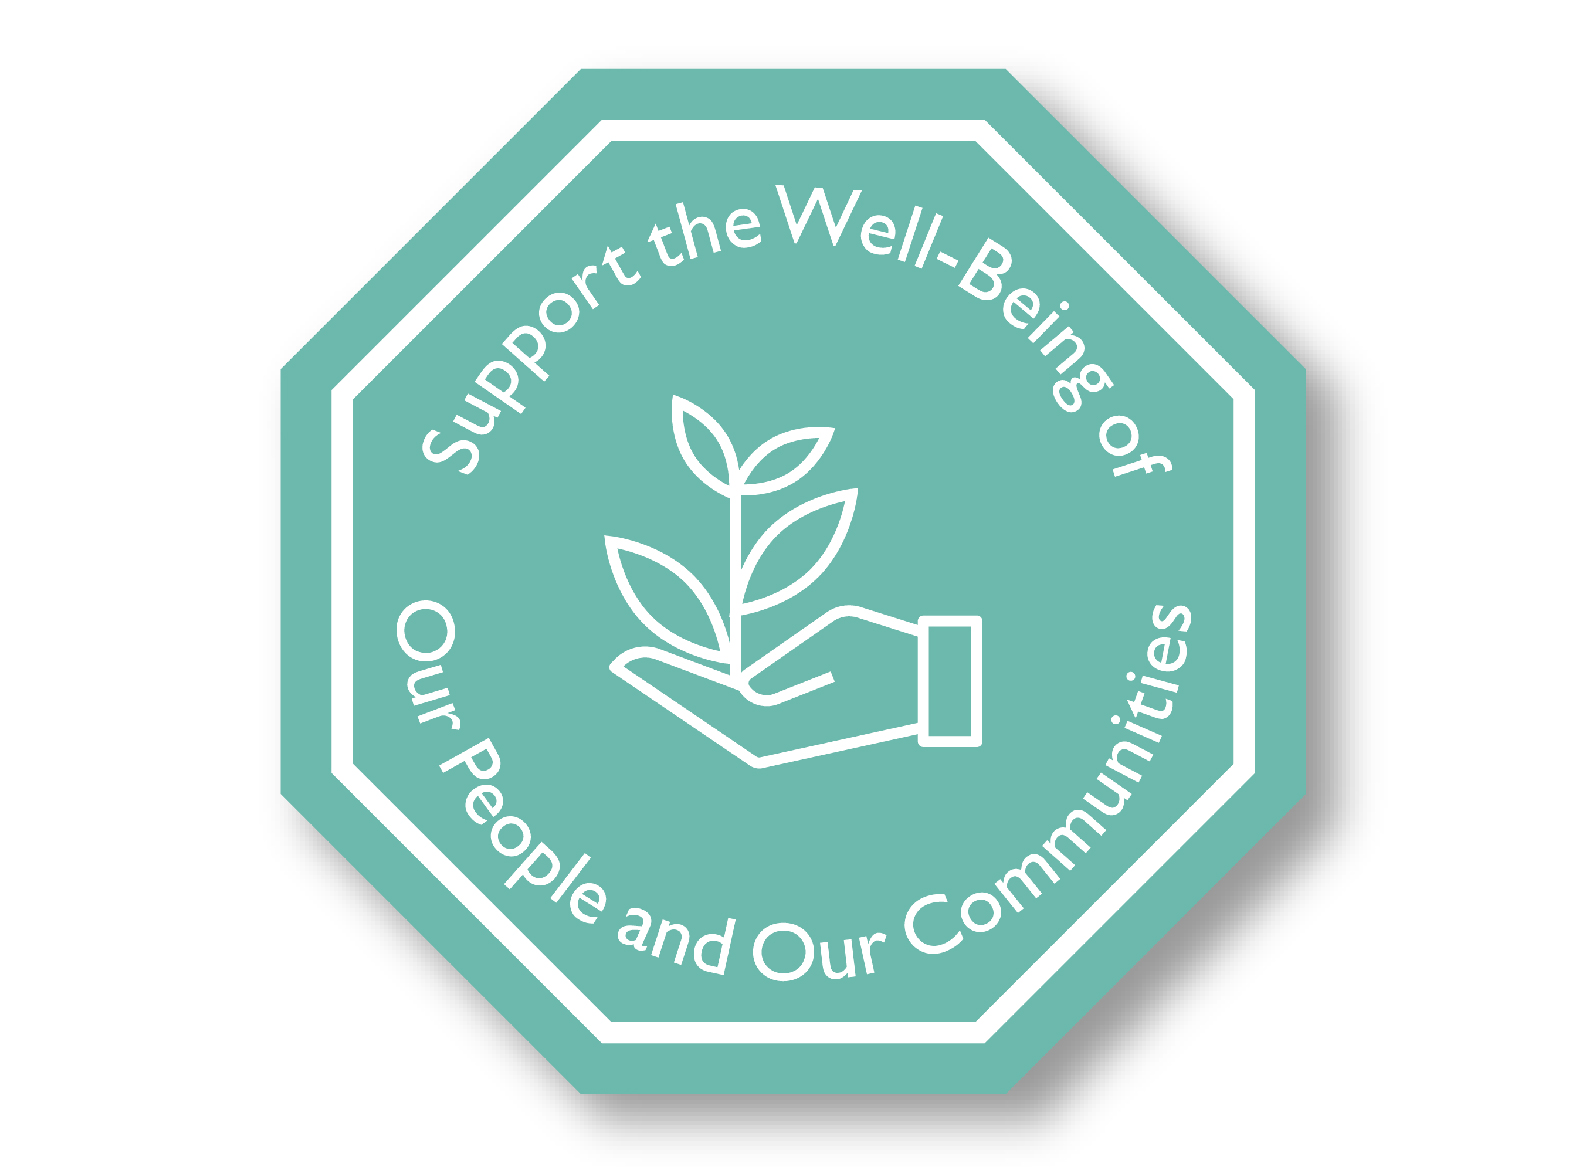 Image shows green octagon with a sketch of a hand holding a seedling and the words Support the Well-Being of Our People and our Communities